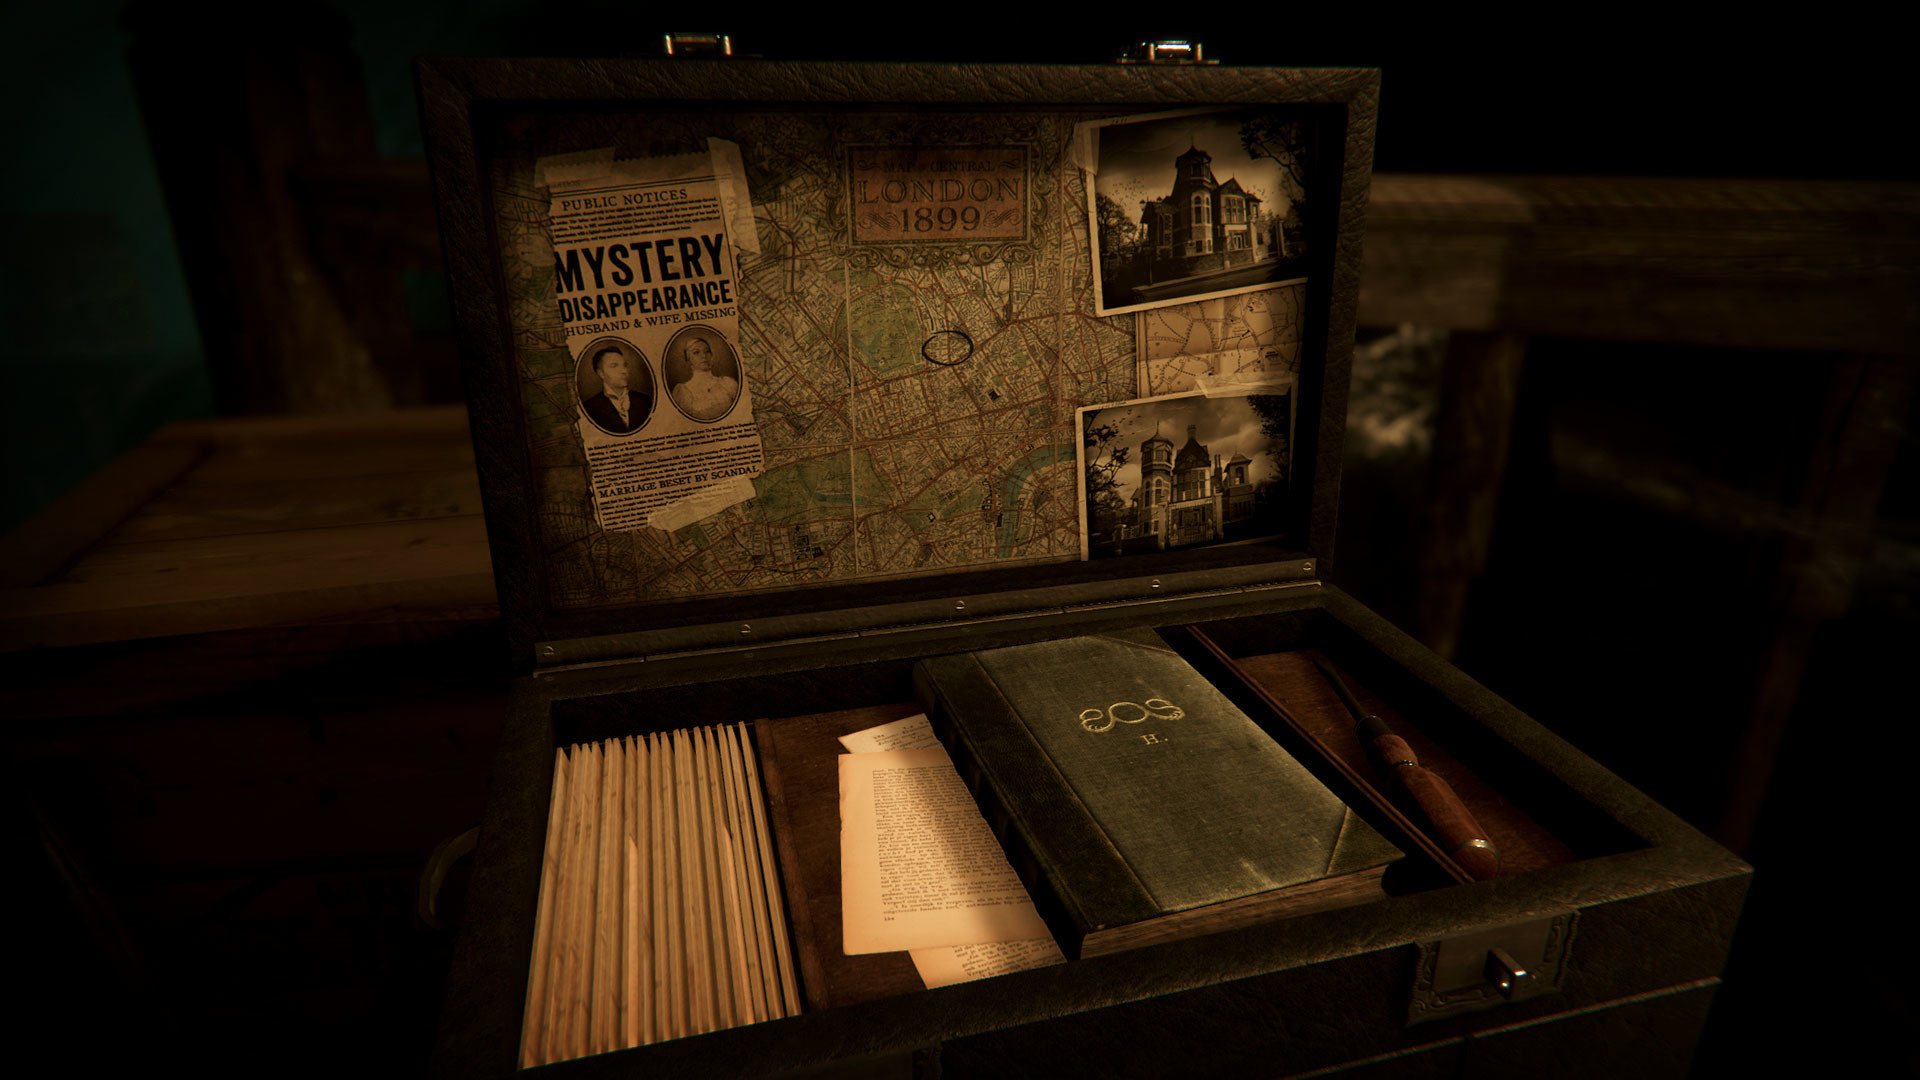 The Room: Old Sins, The game progresses from box to box as the player unlocks the mysteries held within the safe. 1920x1080 Full HD Wallpaper.